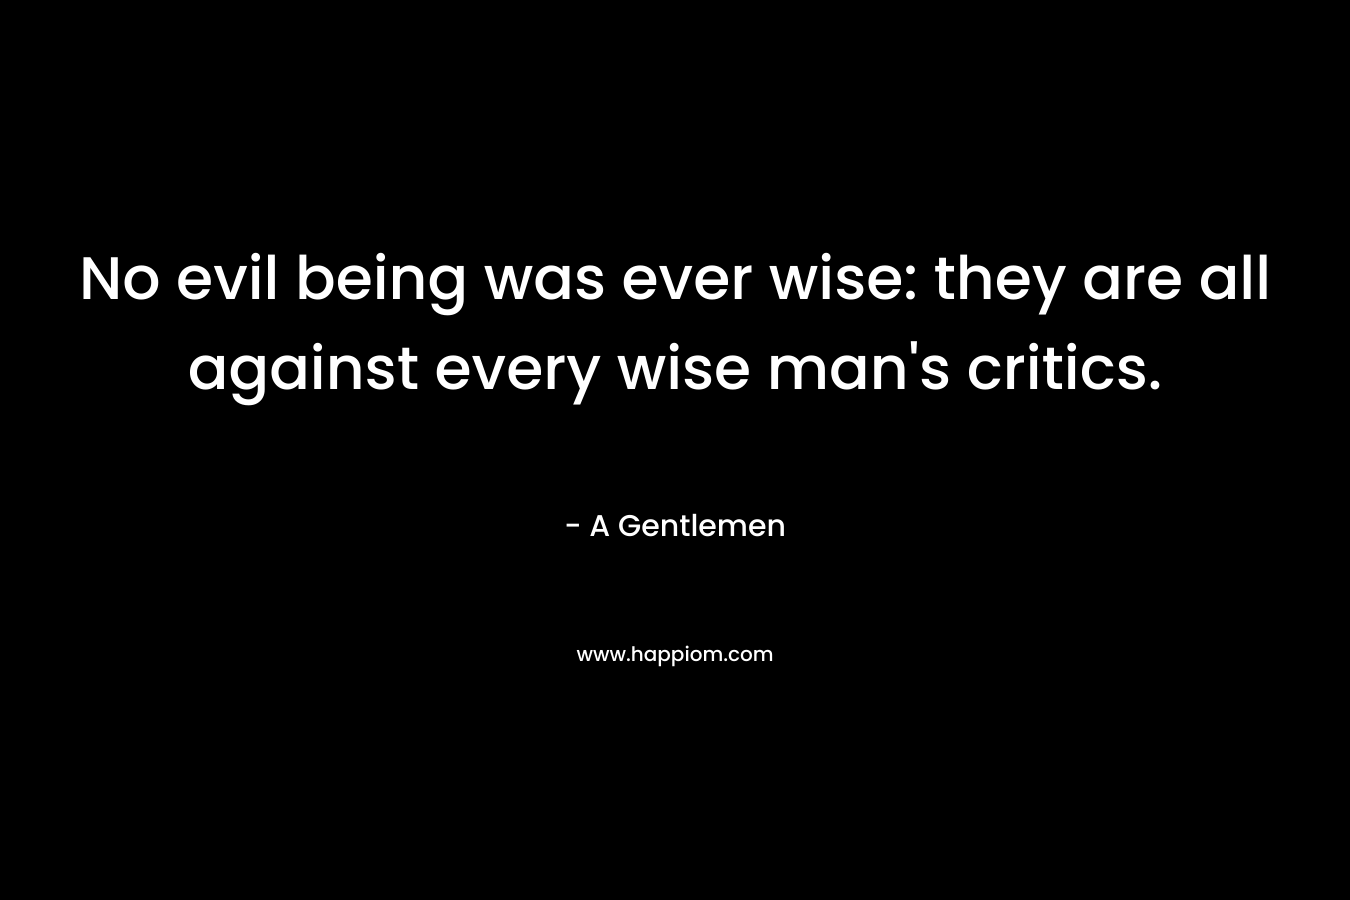 No evil being was ever wise: they are all against every wise man's critics.